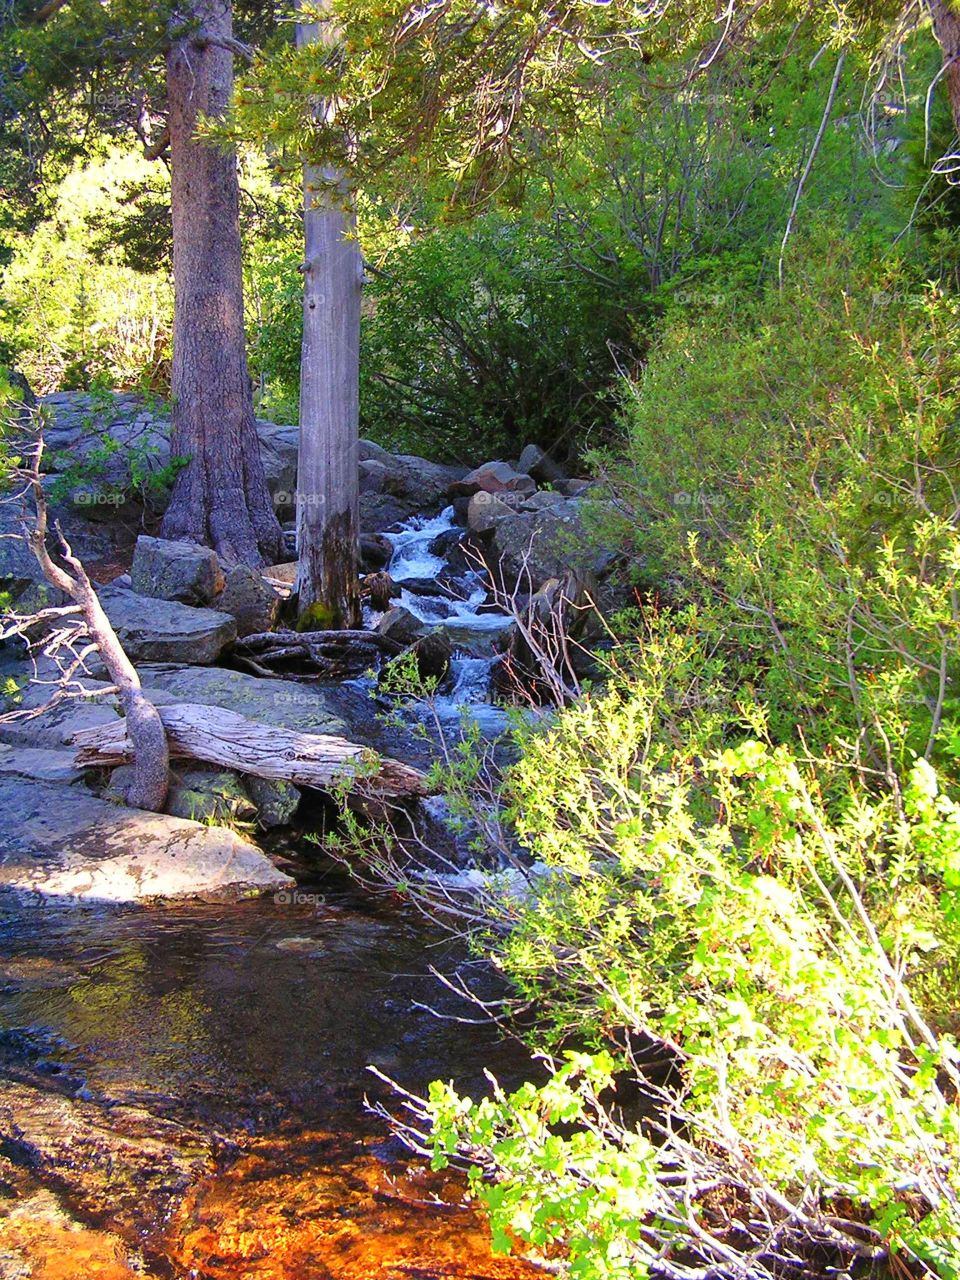 Babbling Creek. Love how nature makes its own path